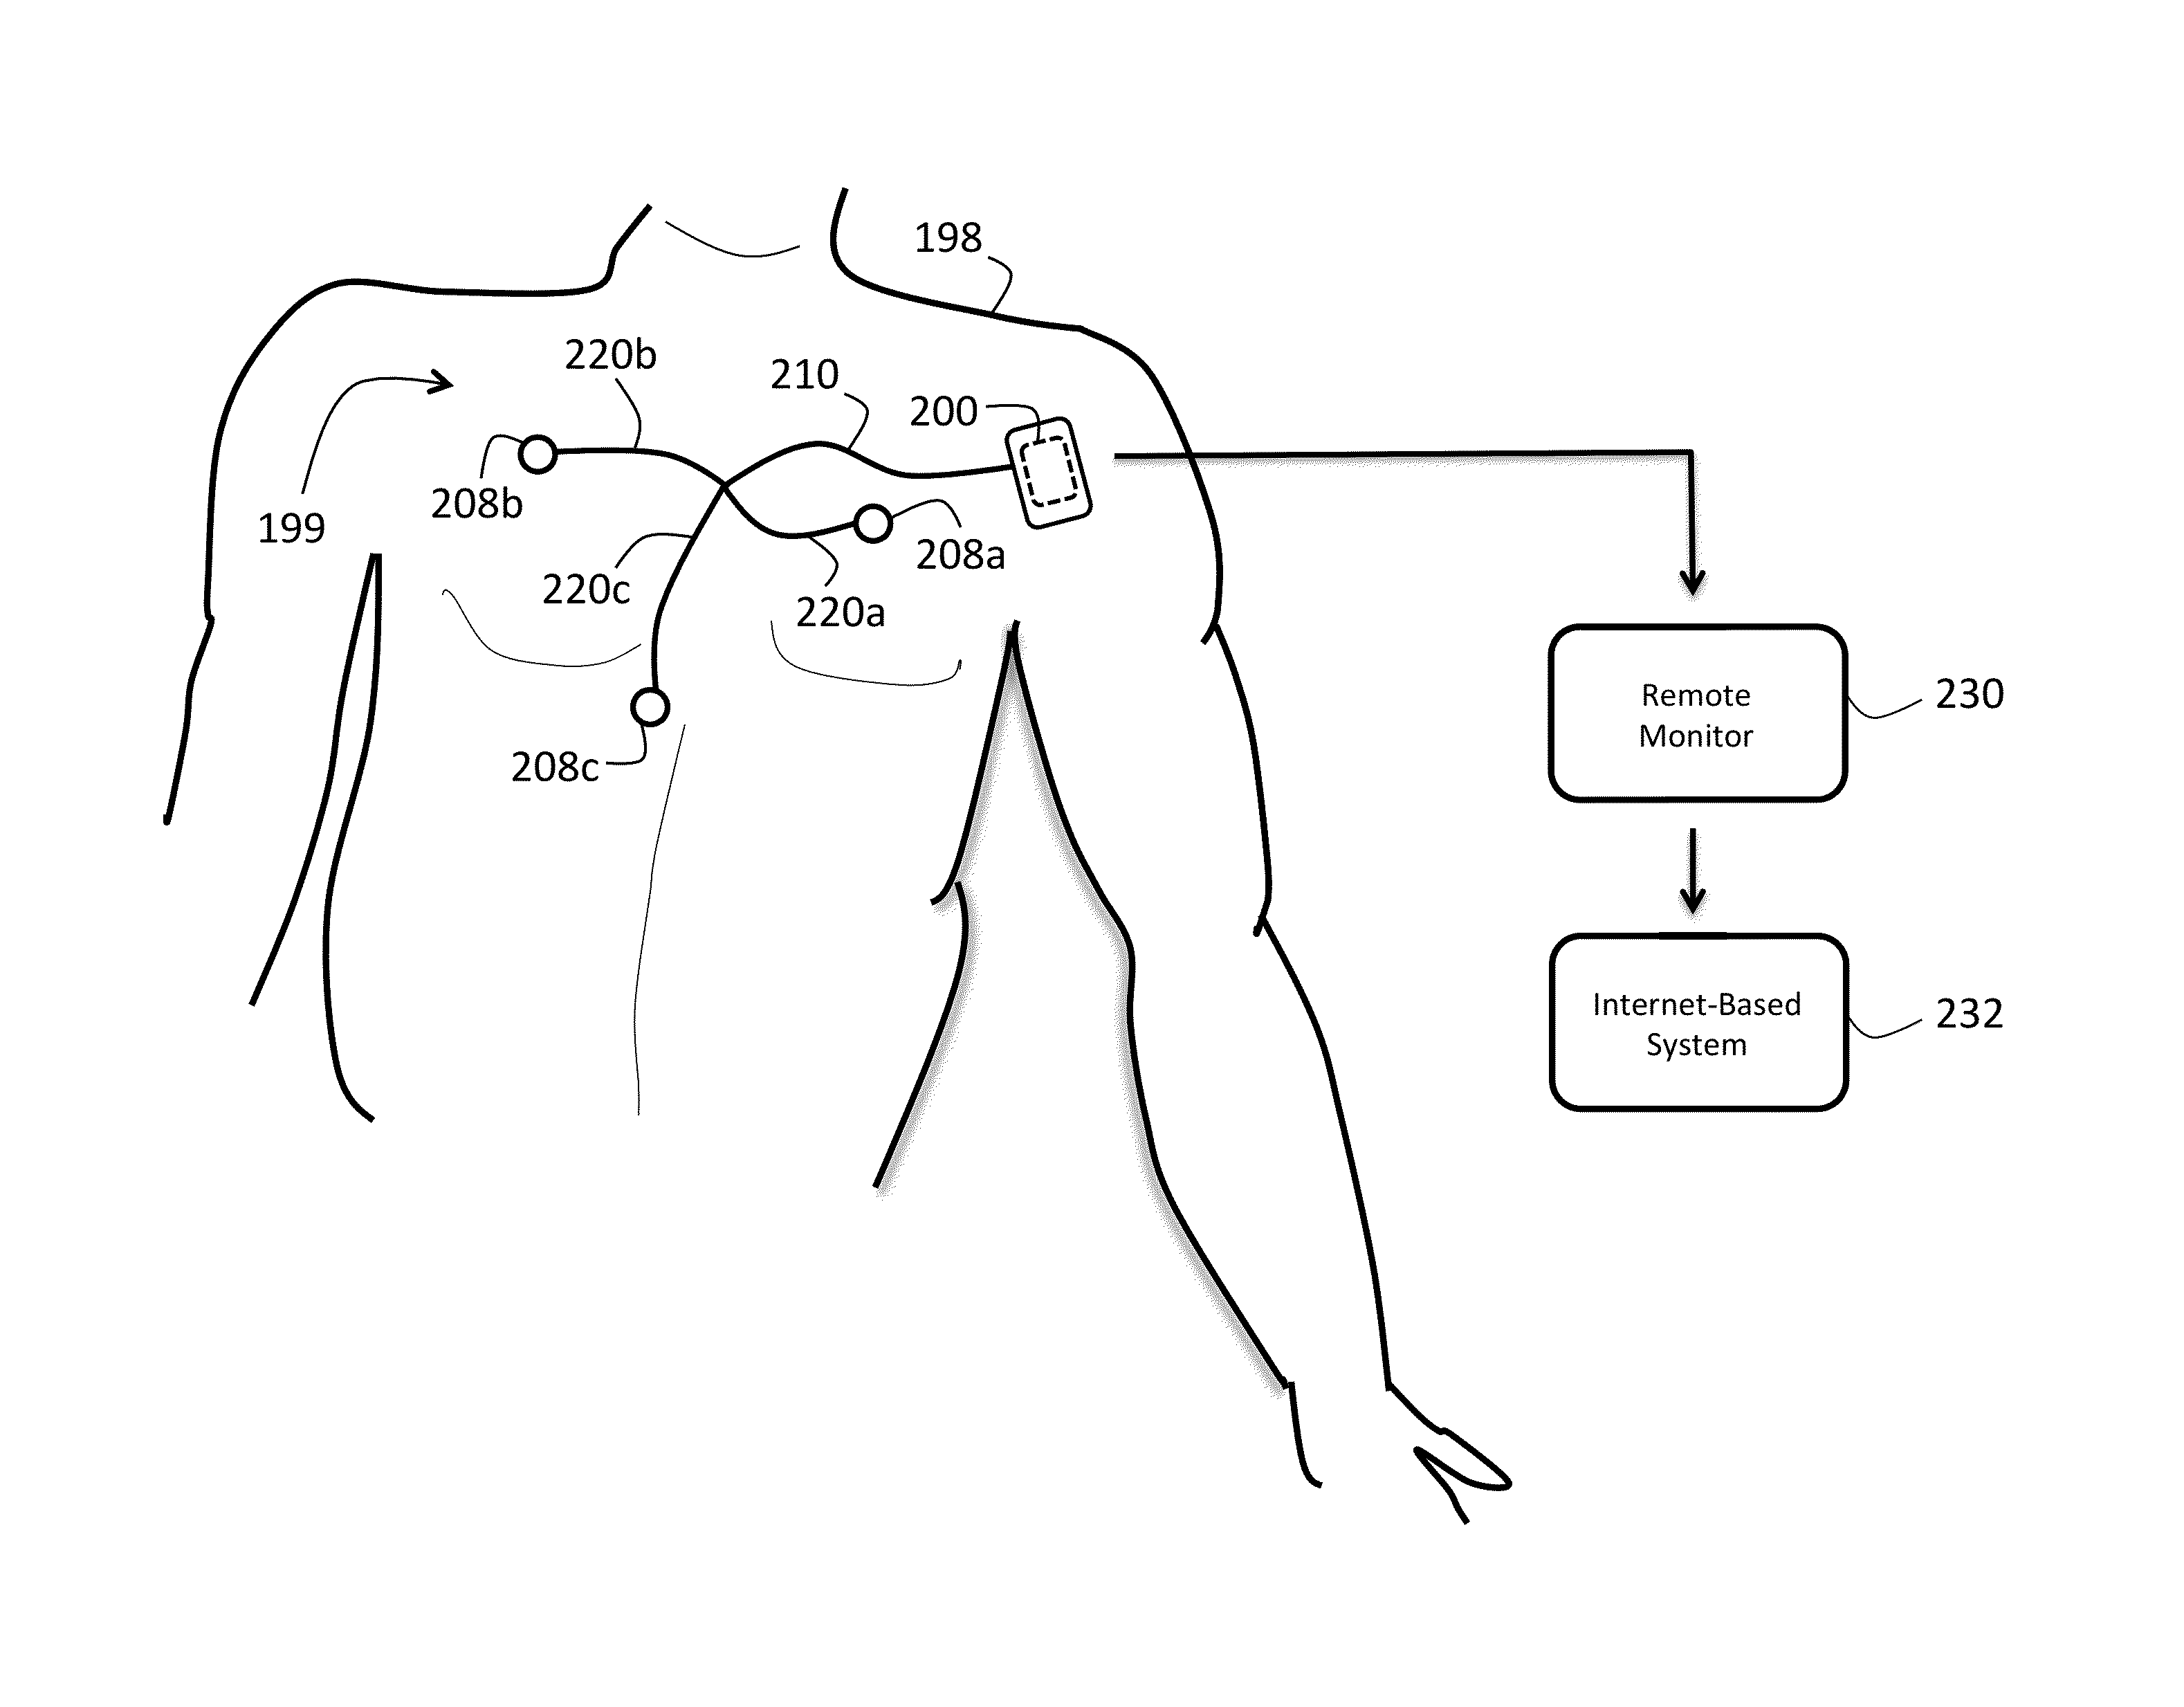 Database and algorithm for evaluating efficacy of an electrophysiology procedure